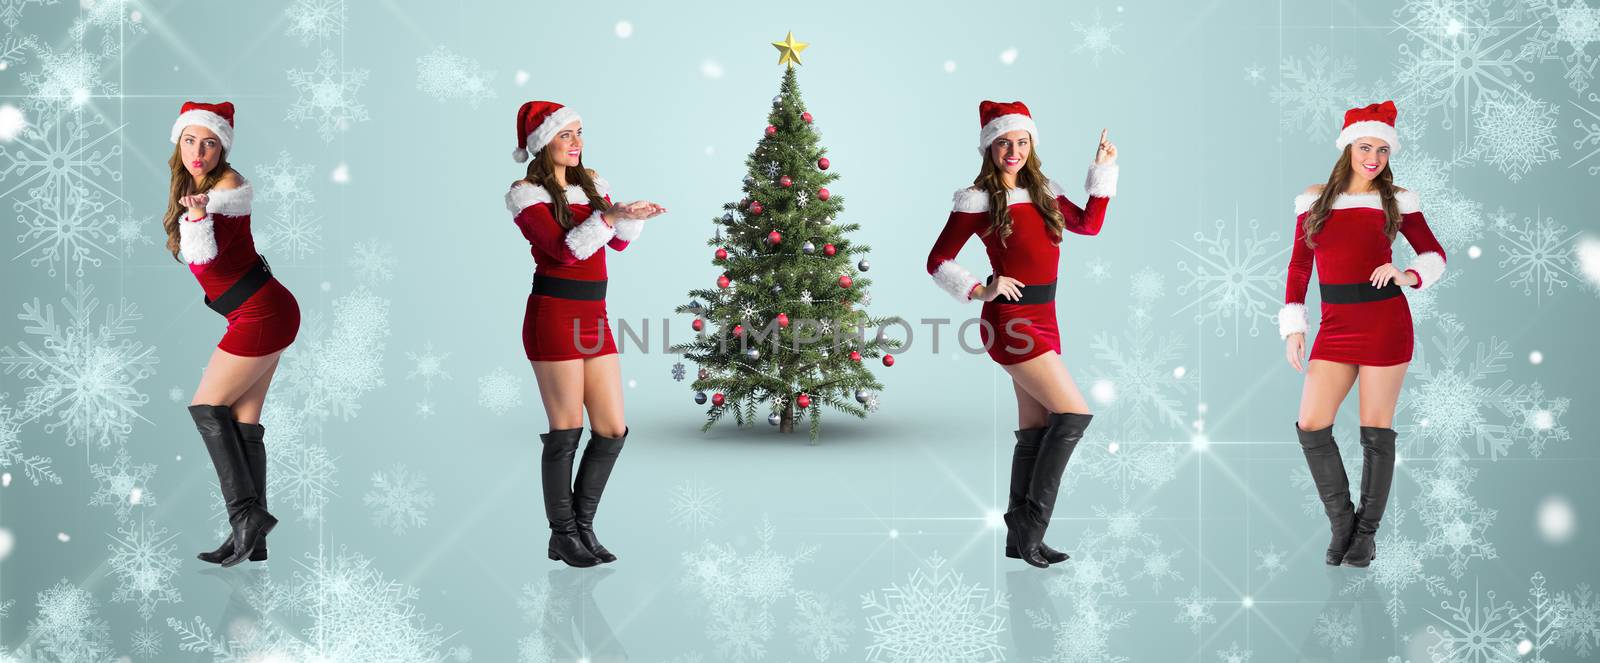 Composite image of different festive blondes against white snowflake design on blue